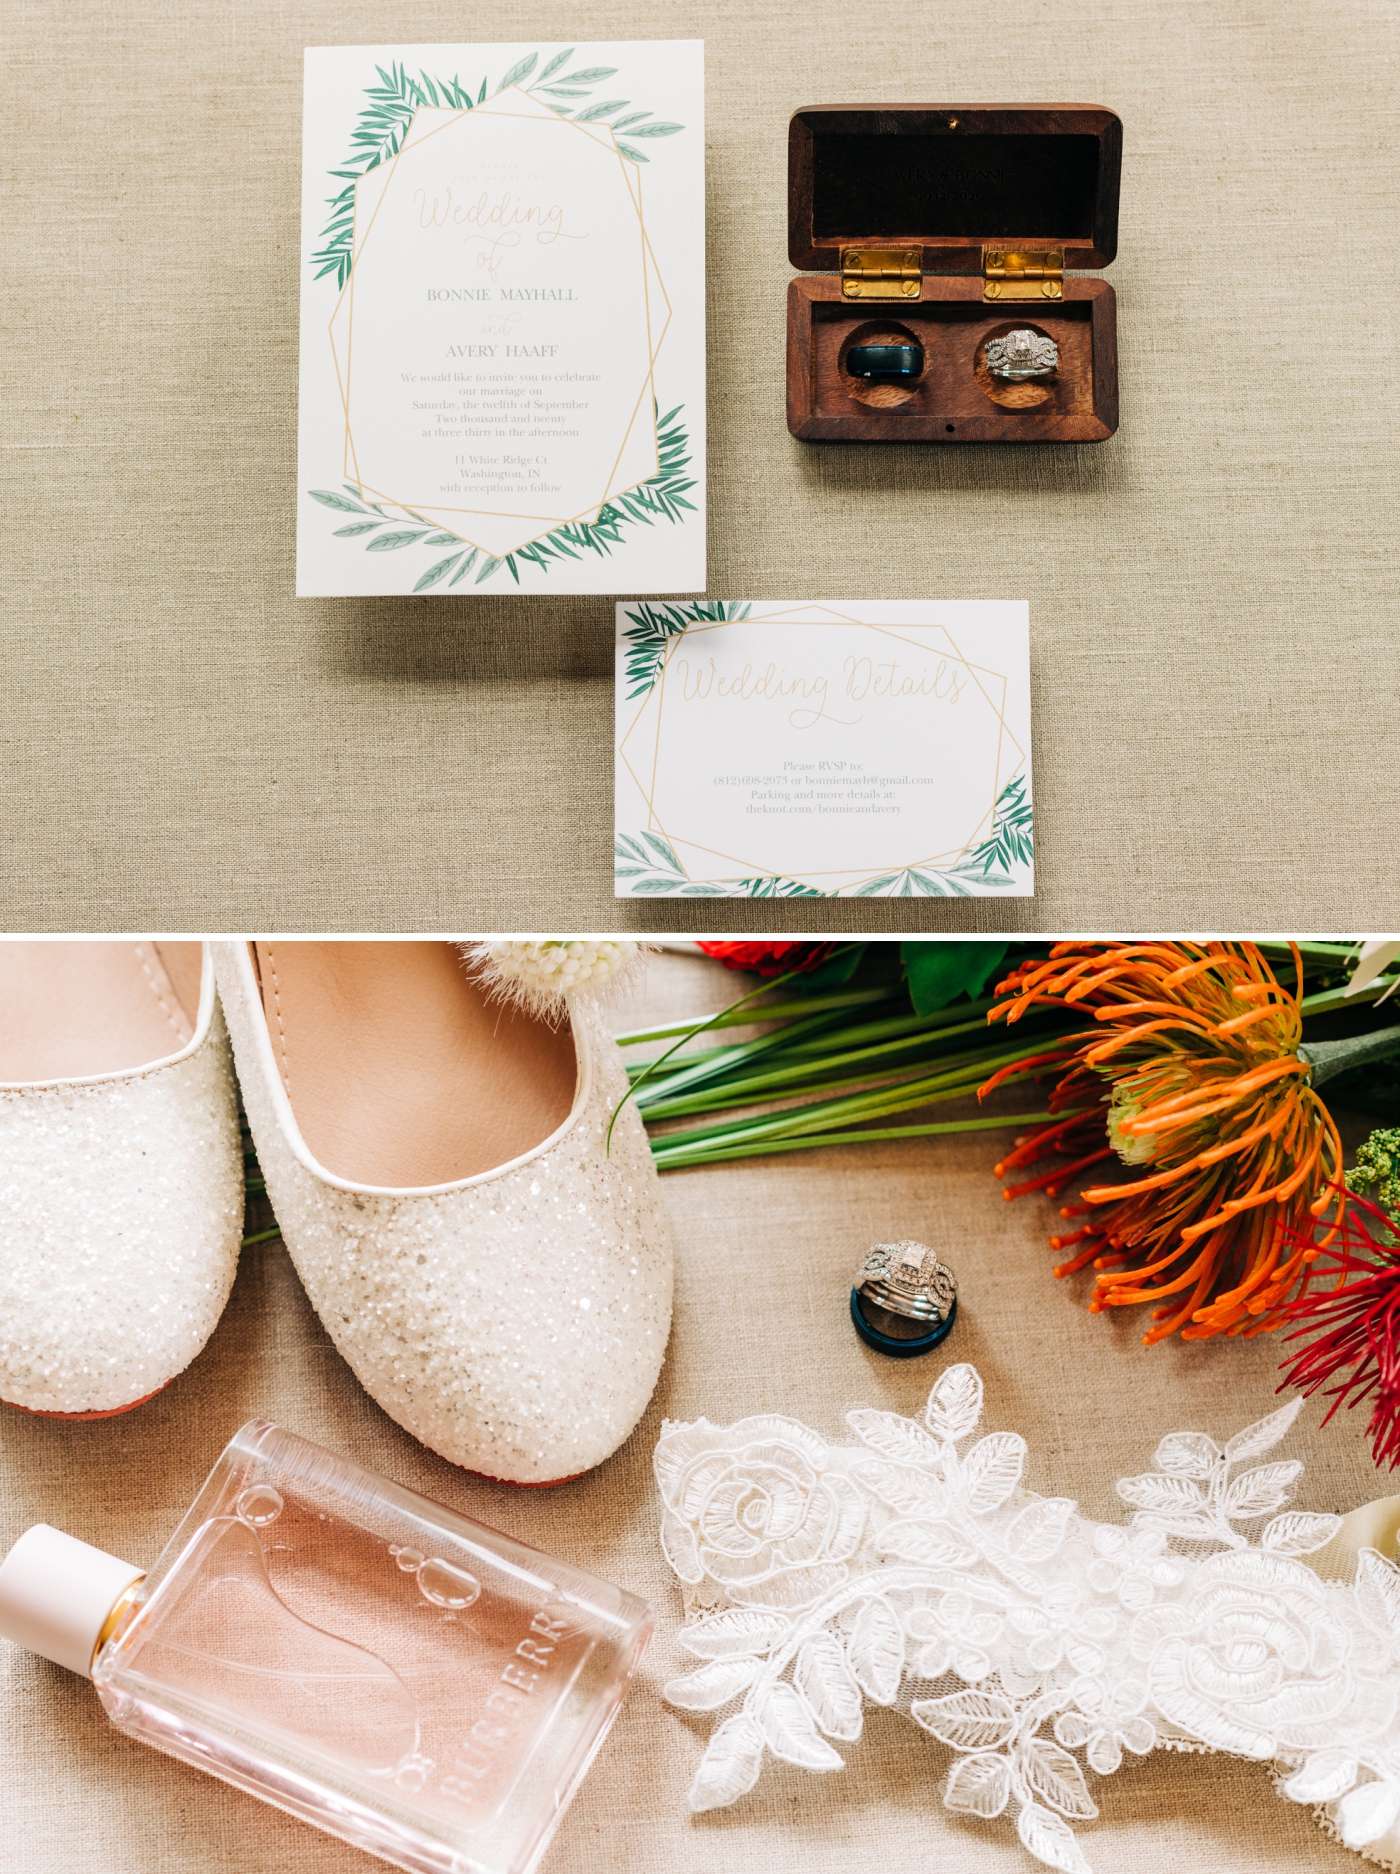 Wedding day details and wedding invitations